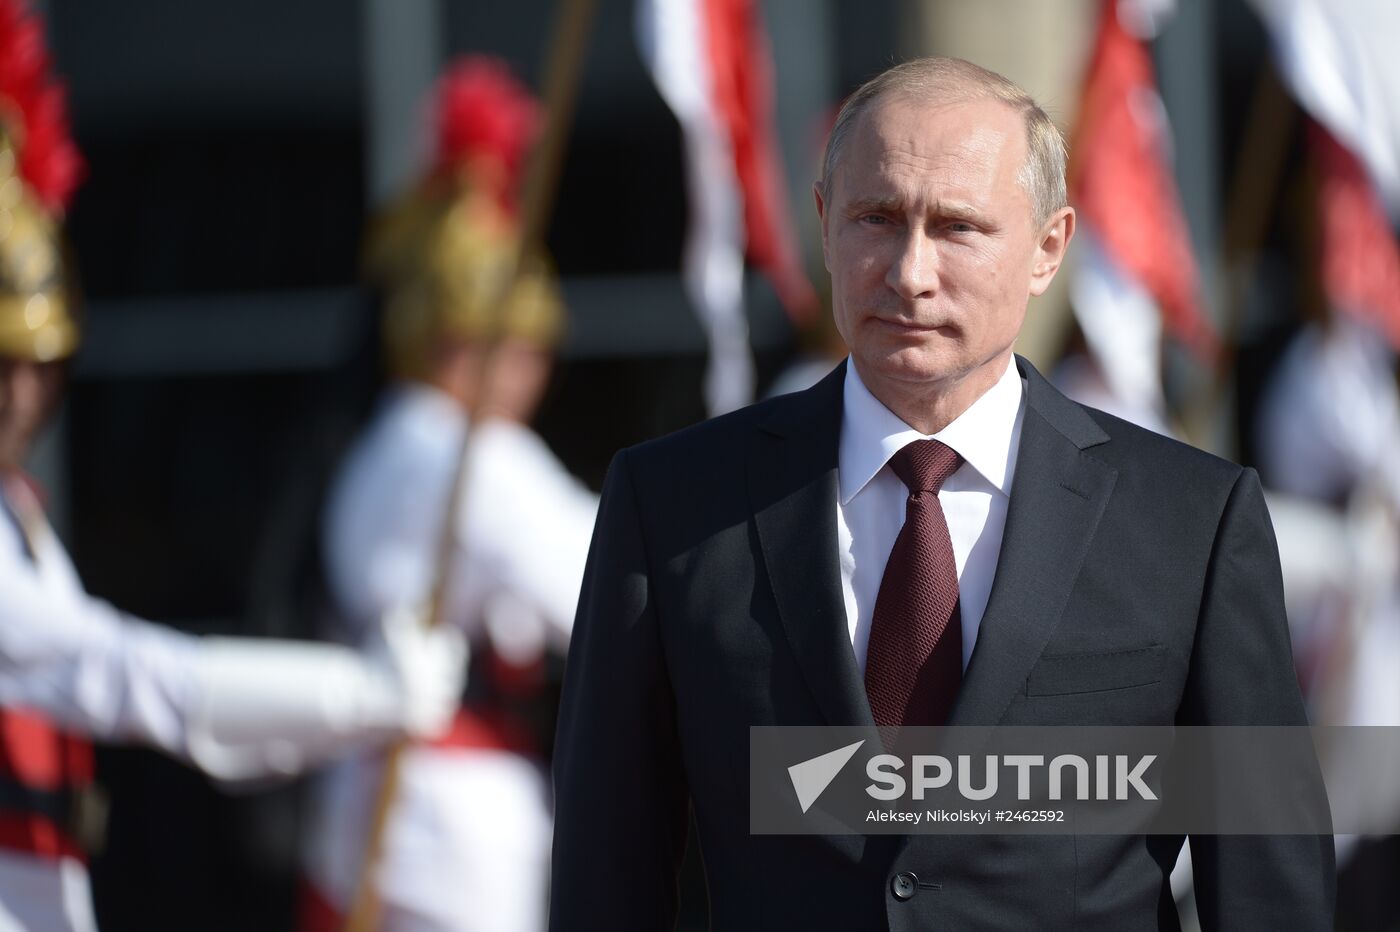 Vladimir Putin's official visit to Brazil. Day two